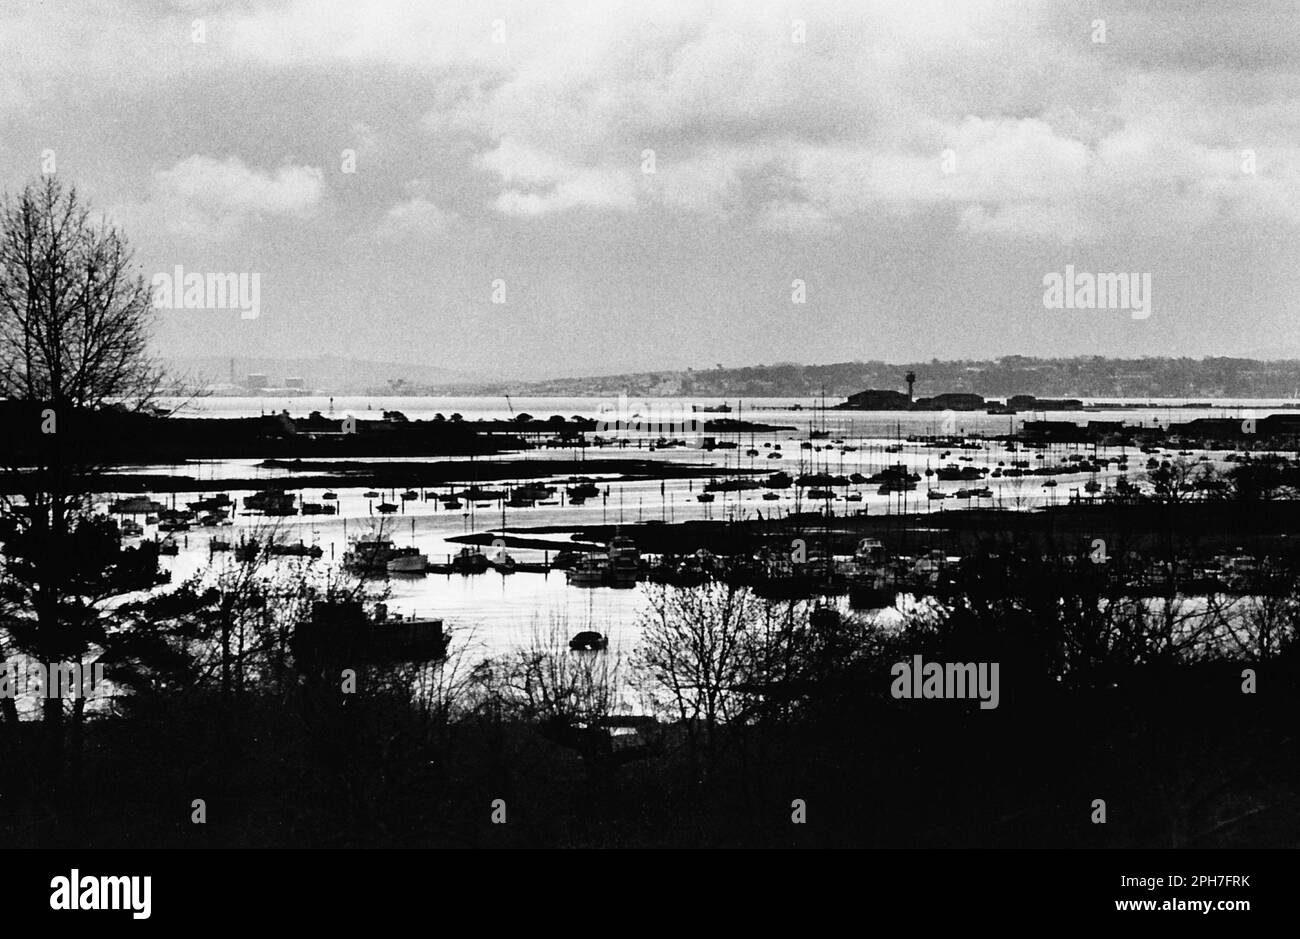 AJAXNETPHOTO. 1976. BURSLEDON, ENGLAND. - YACHTING MECCA -  FAMOUS HAMBLE RIVER WINDING SOUTH WEST TOWARD SOUTHAMPTON WATER AND THE SOLENT; RIVER HAS MOORINGS FOR MORE THAN 3500 BOATS ON TROTS AND AT SEVERAL LARGE MARINAS. RIVER EMPTIES INTO LOWER REACHES OF SOUTHAMPTON WATER FROM WHERE YACHTS CAN NAVIGATE THE 5 MILE SOLENT CROSSING TO COWES (BACKGROUND). FAMED CALSHOT RADAR TOWER, OUTPOST FOR SOUTHAMPTON PORT CONTROL IS SEEN SILHOUETTED RIGHT CENTRE.PHOTO:PETER EASTLAND/AJAX REF:MX340 220605 11 (762204 GR2) Stock Photo